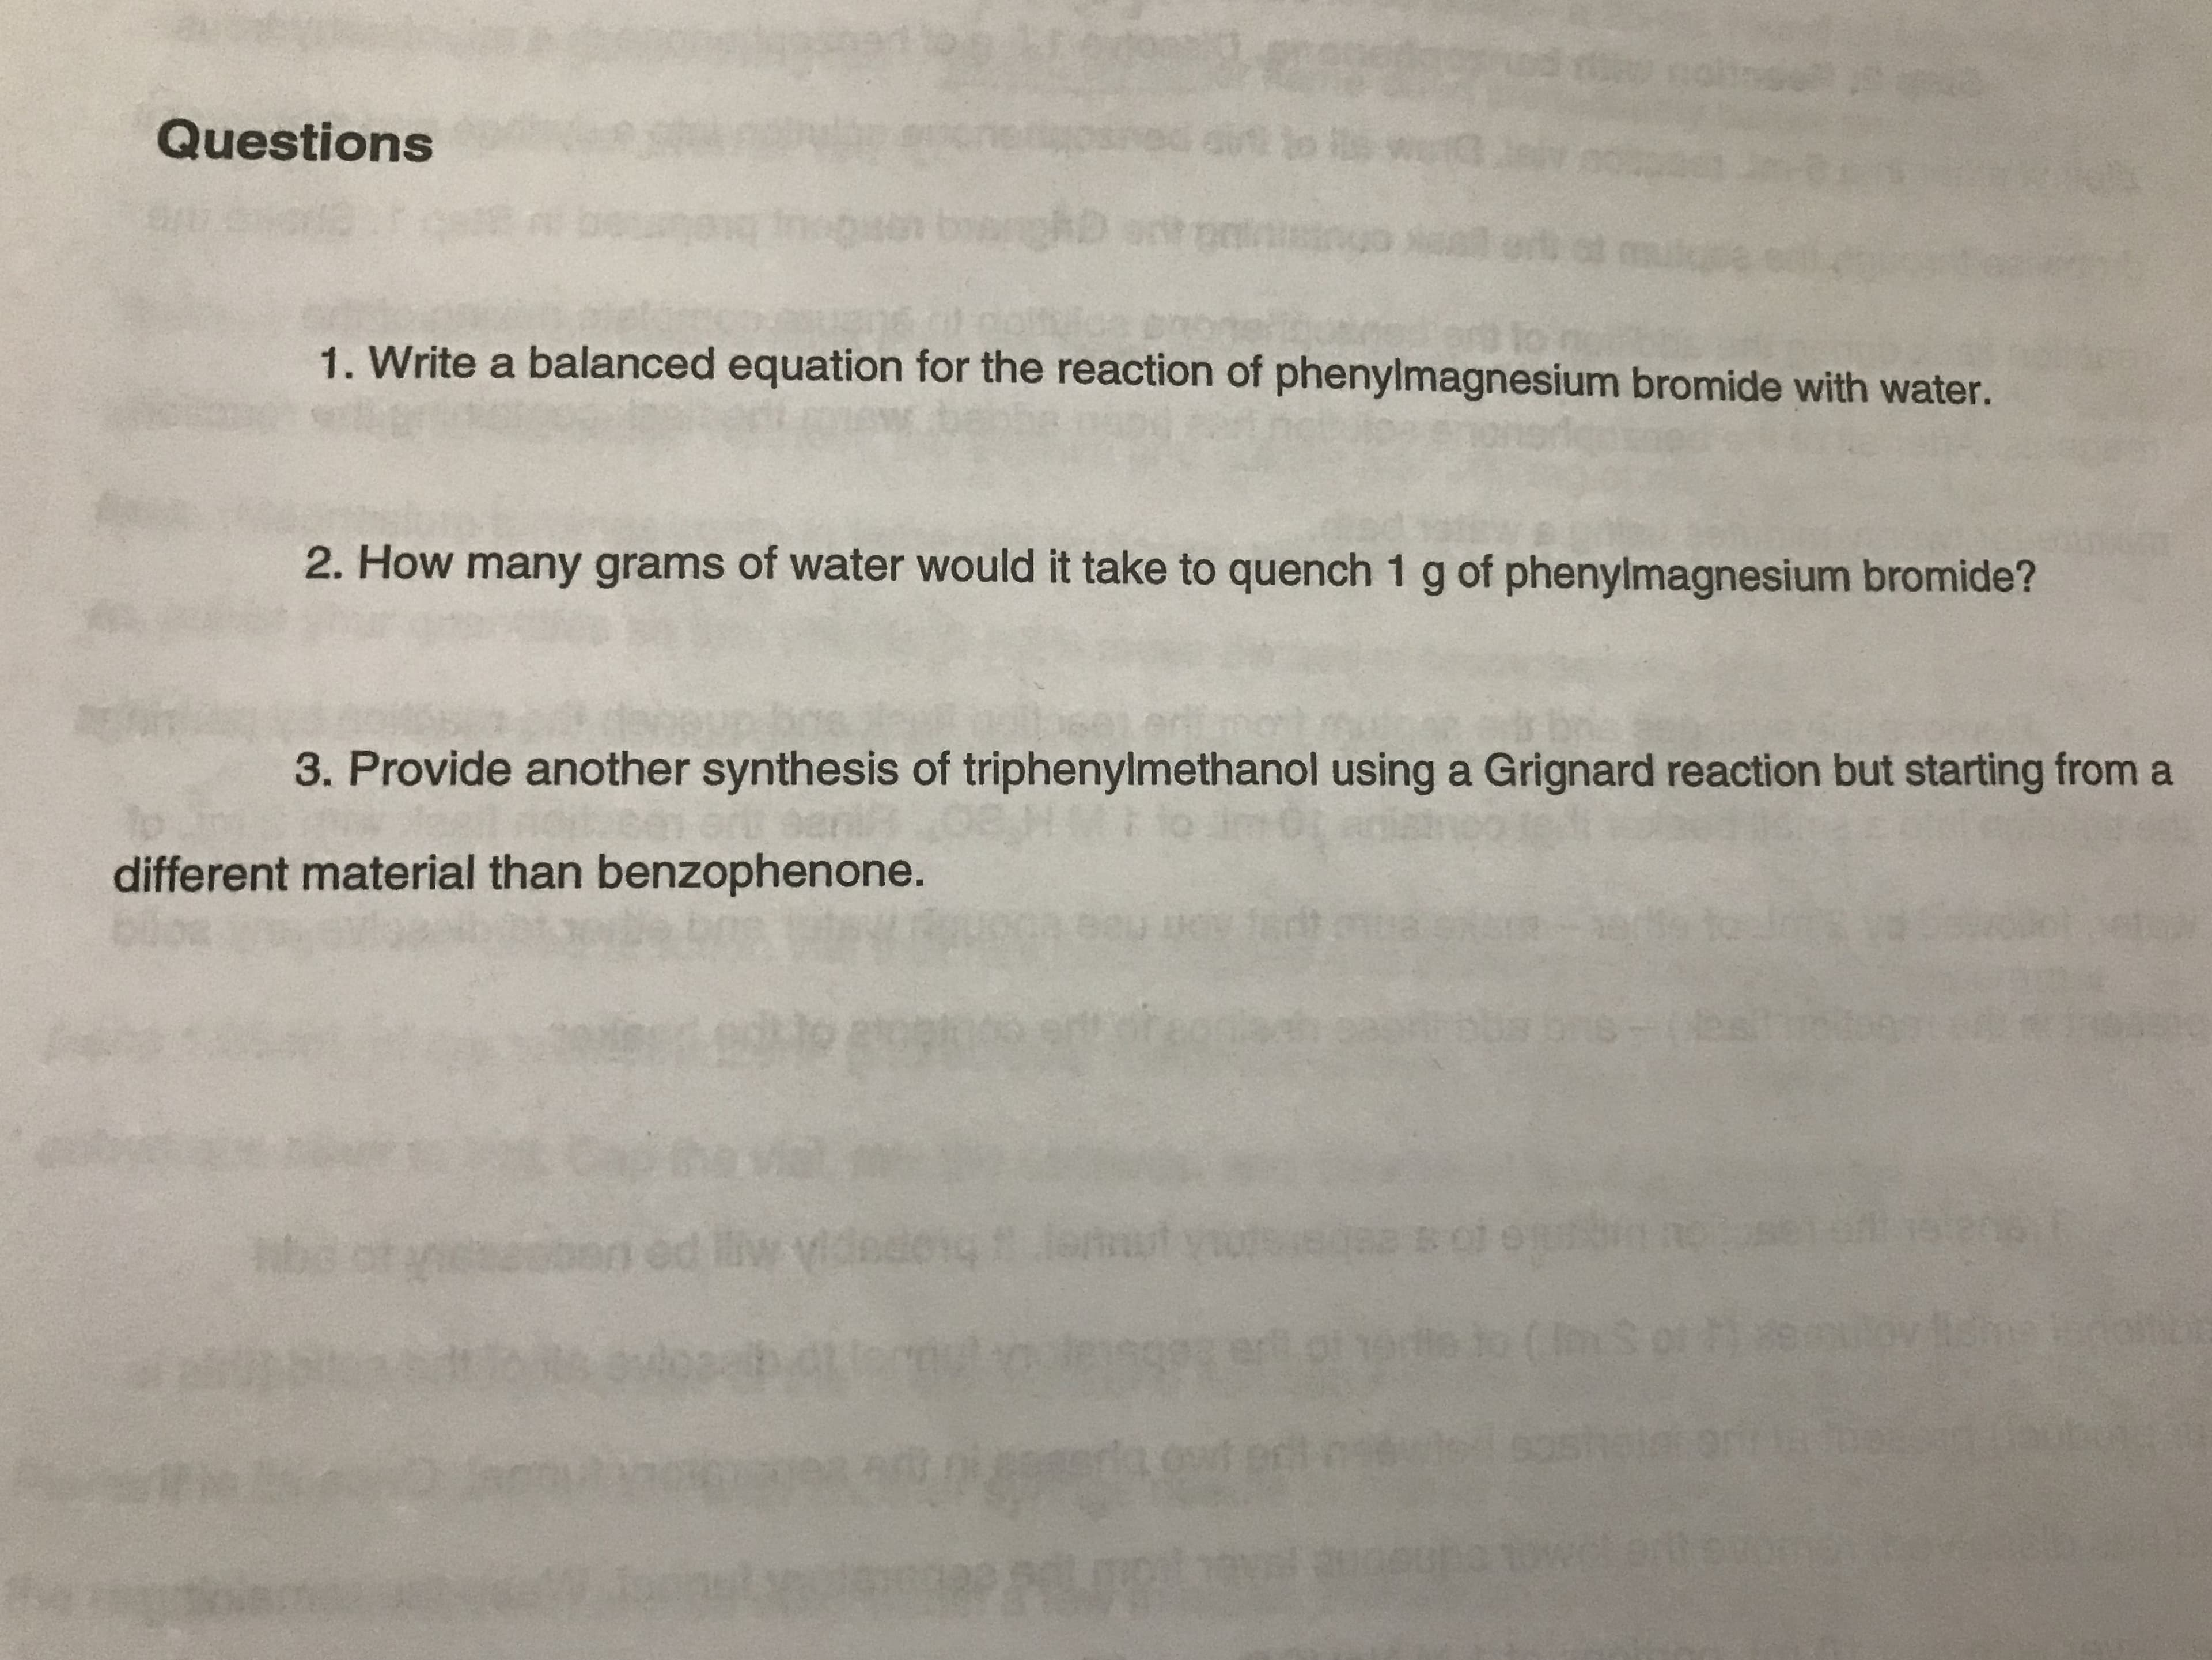 b olb
Questions
1. Write a balanced equation for the reaction of phenylmagnesium bromide with water.
2. How many grams of water would it take to quench 1 g of phenylmagnesium bromide?
3. Provide another synthesis of triphenylmethanol using a Grignard reaction but starting from a
different material than benzophenone.
Tadt 01088rer19rt9
s DTS=(D
yel208
02 Bot et
ed i
ovitdhe ie
ert of odito (
gp
da wt ortogoutsdsoshaorm
Hannoup
UR
P F
